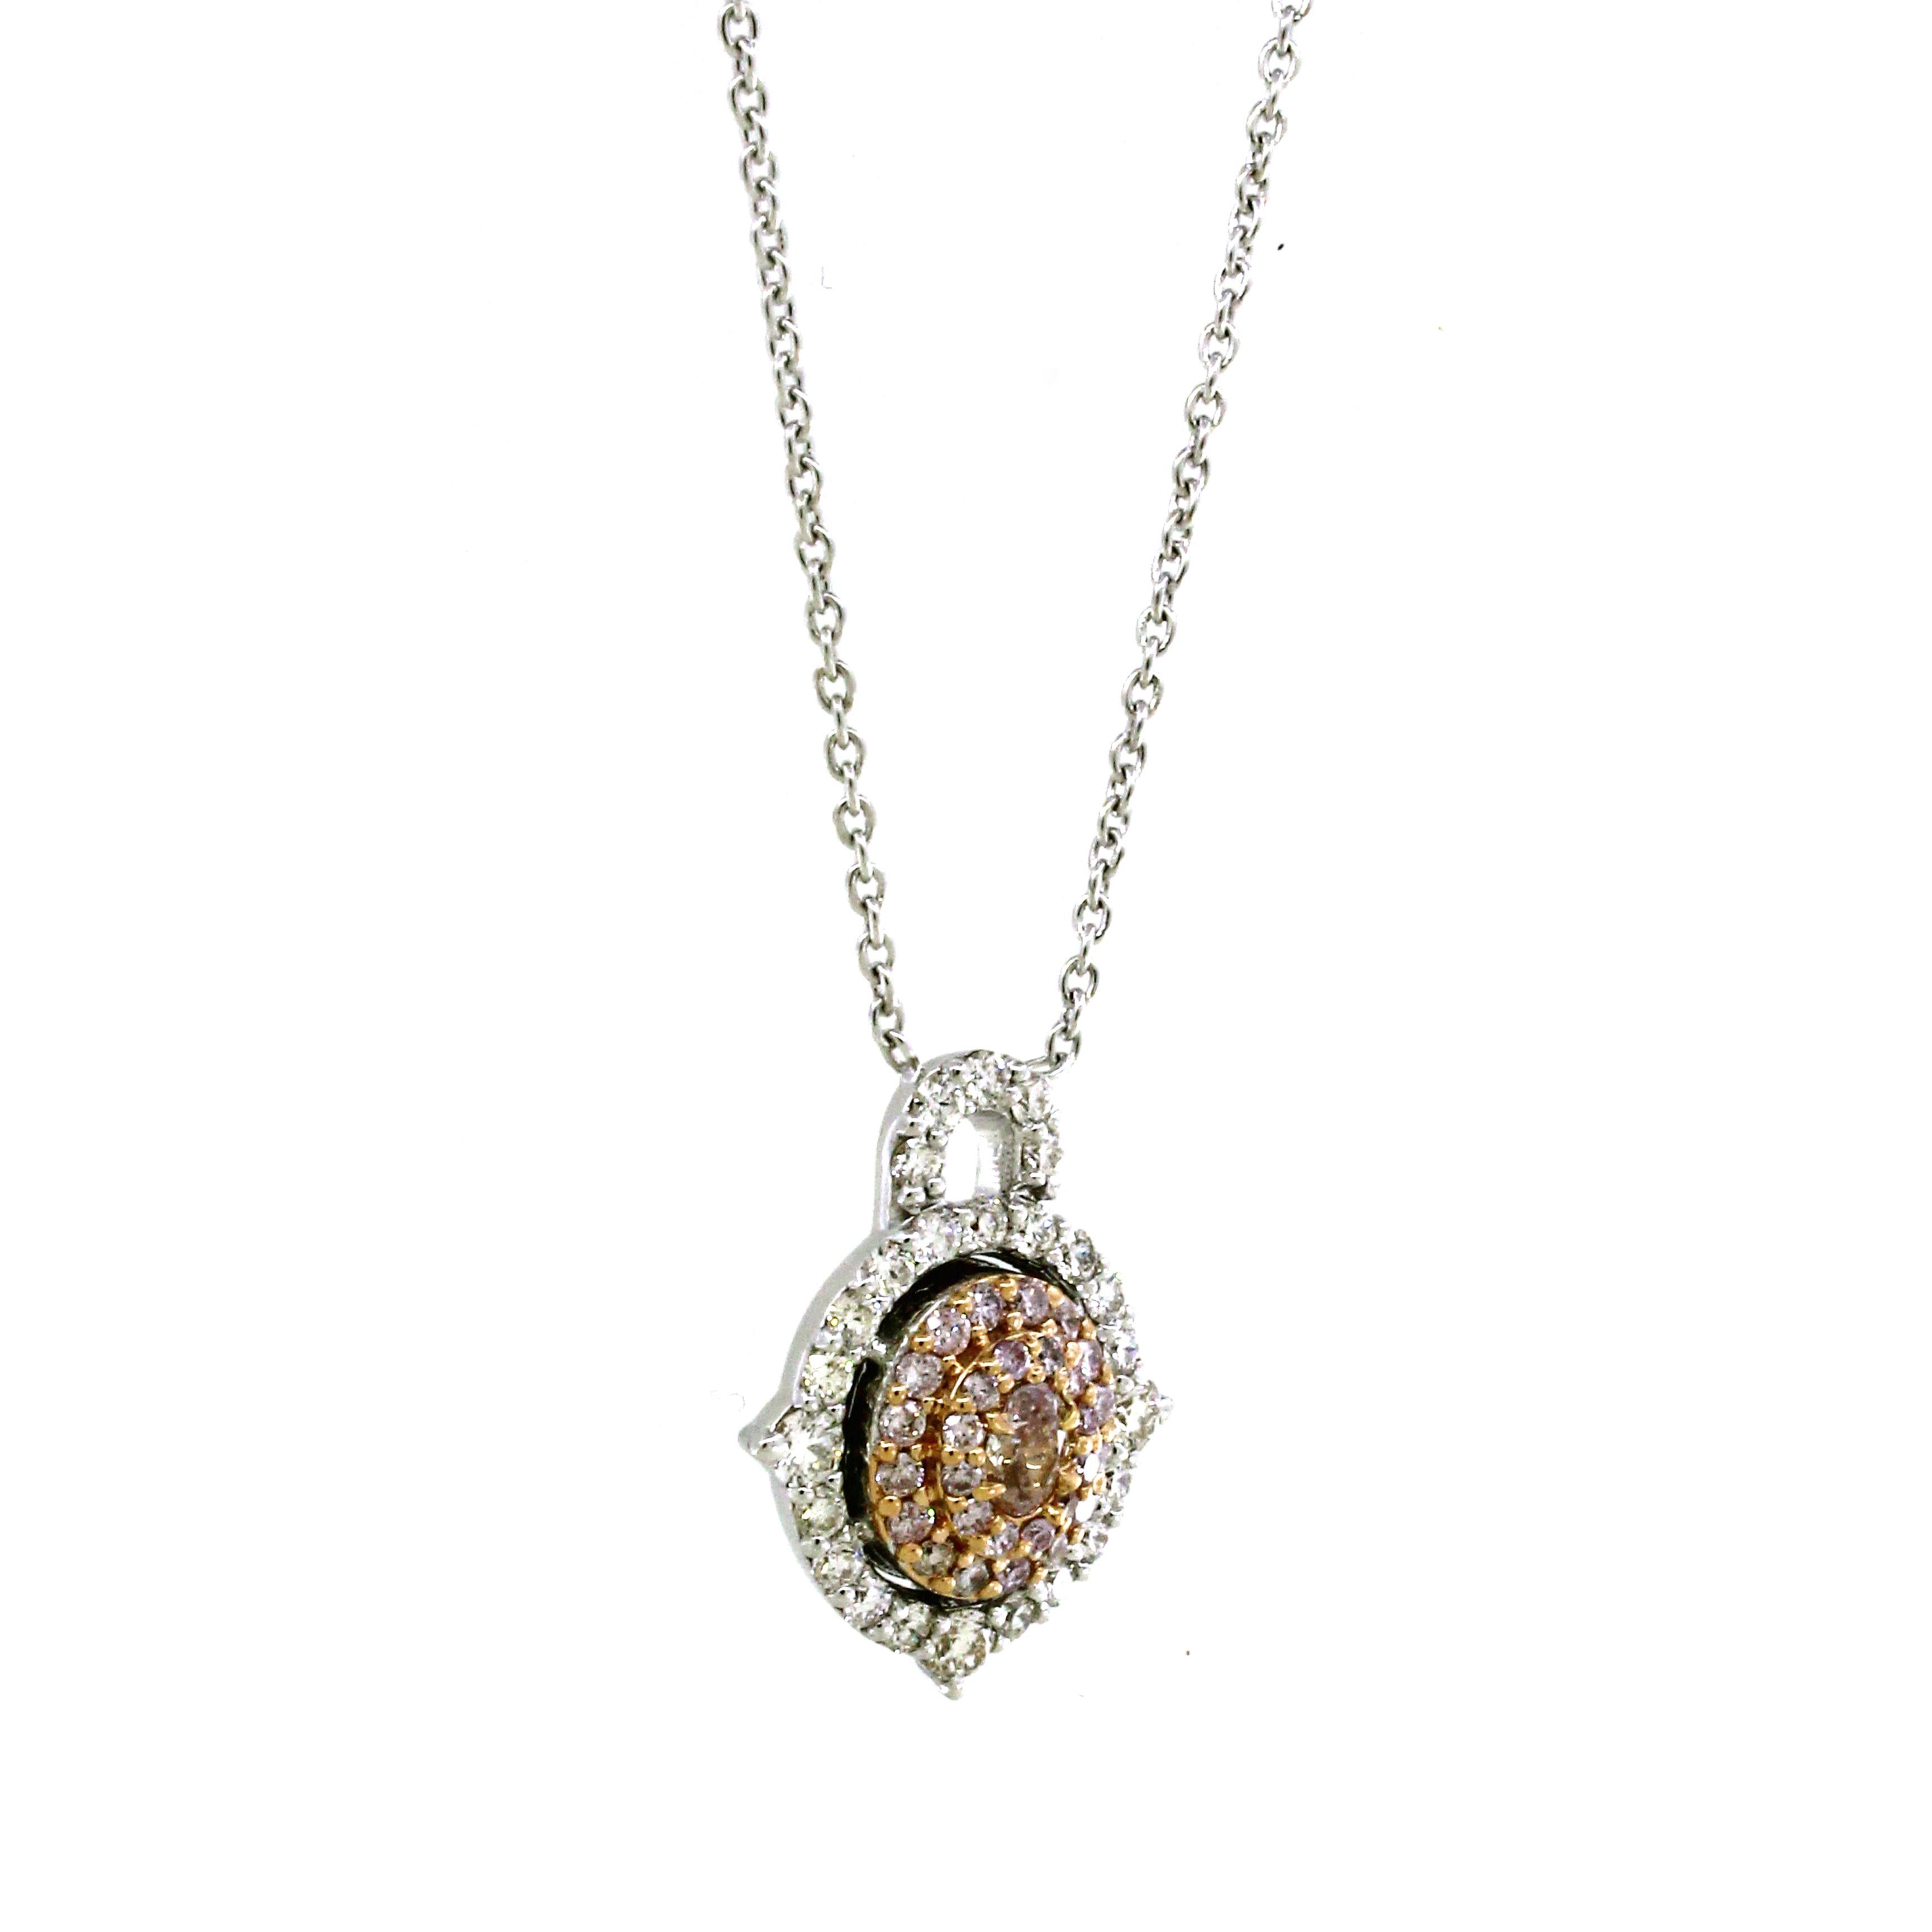 Introducing our Enchanting Petals Pendant, an exquisite adornment crafted in 18k white gold, weighing 4.68 grams. At its core, a radiant fancy pink oval-cut diamond, 0.11 carats, takes center stage, emanating a delicate allure. Embracing this